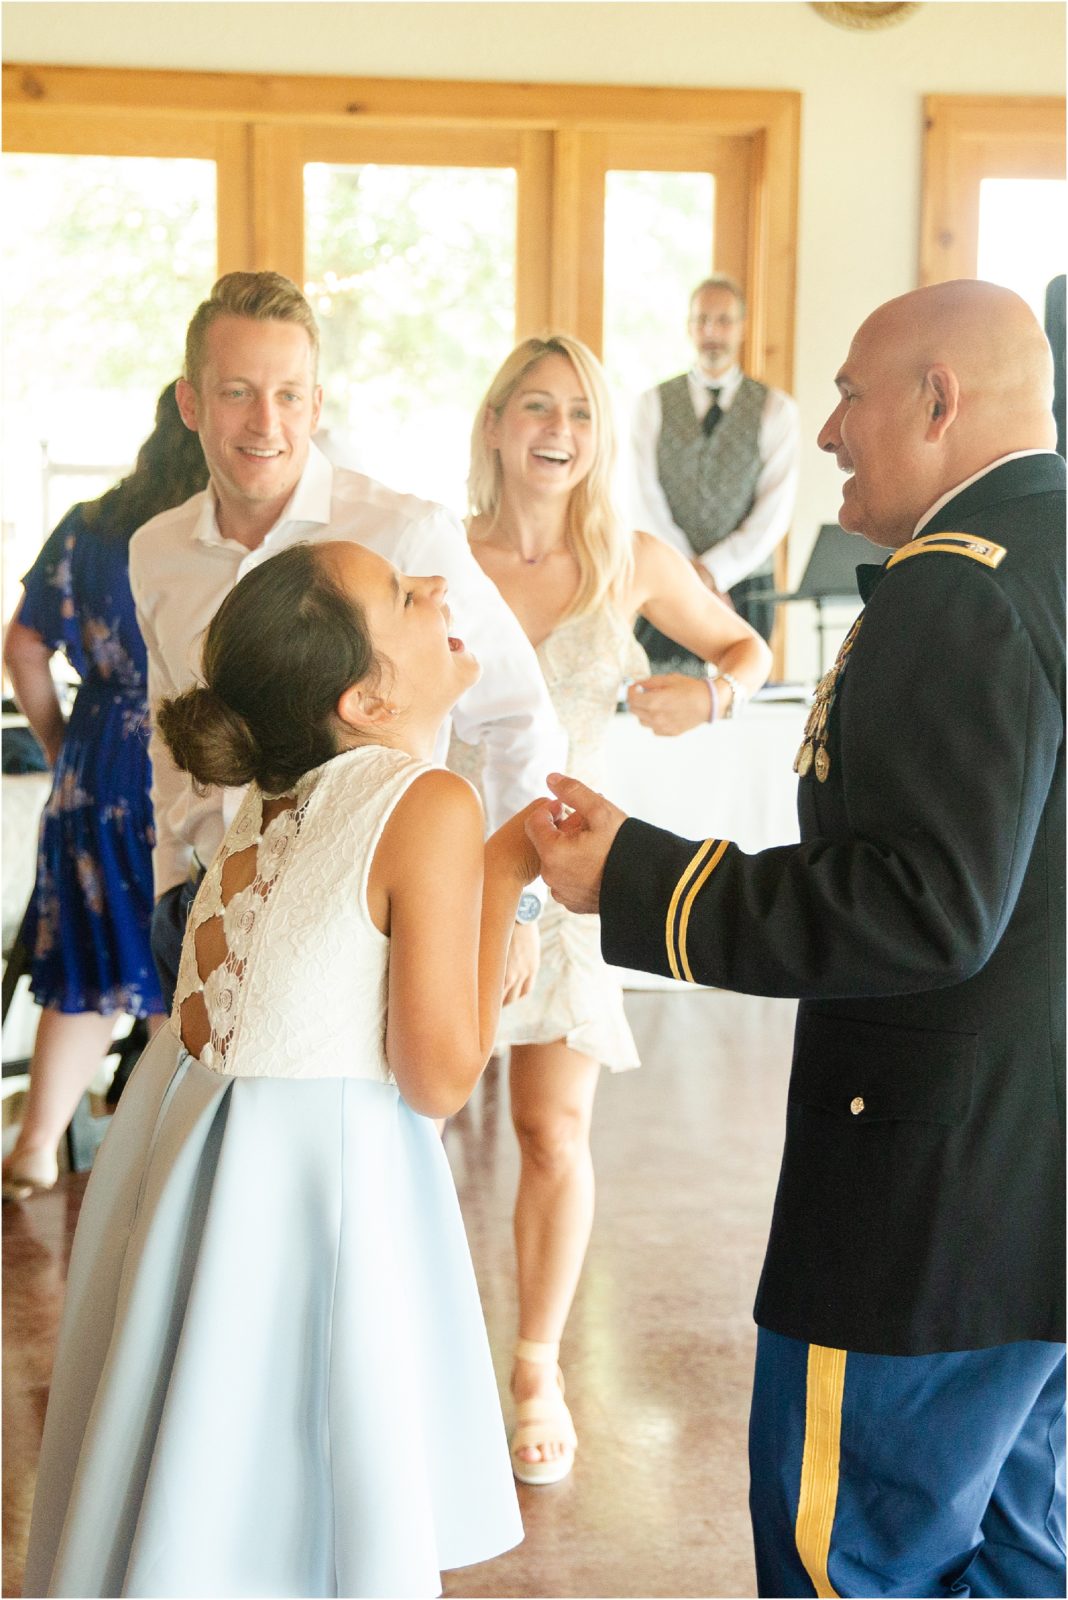 Military dad dancing with daughter